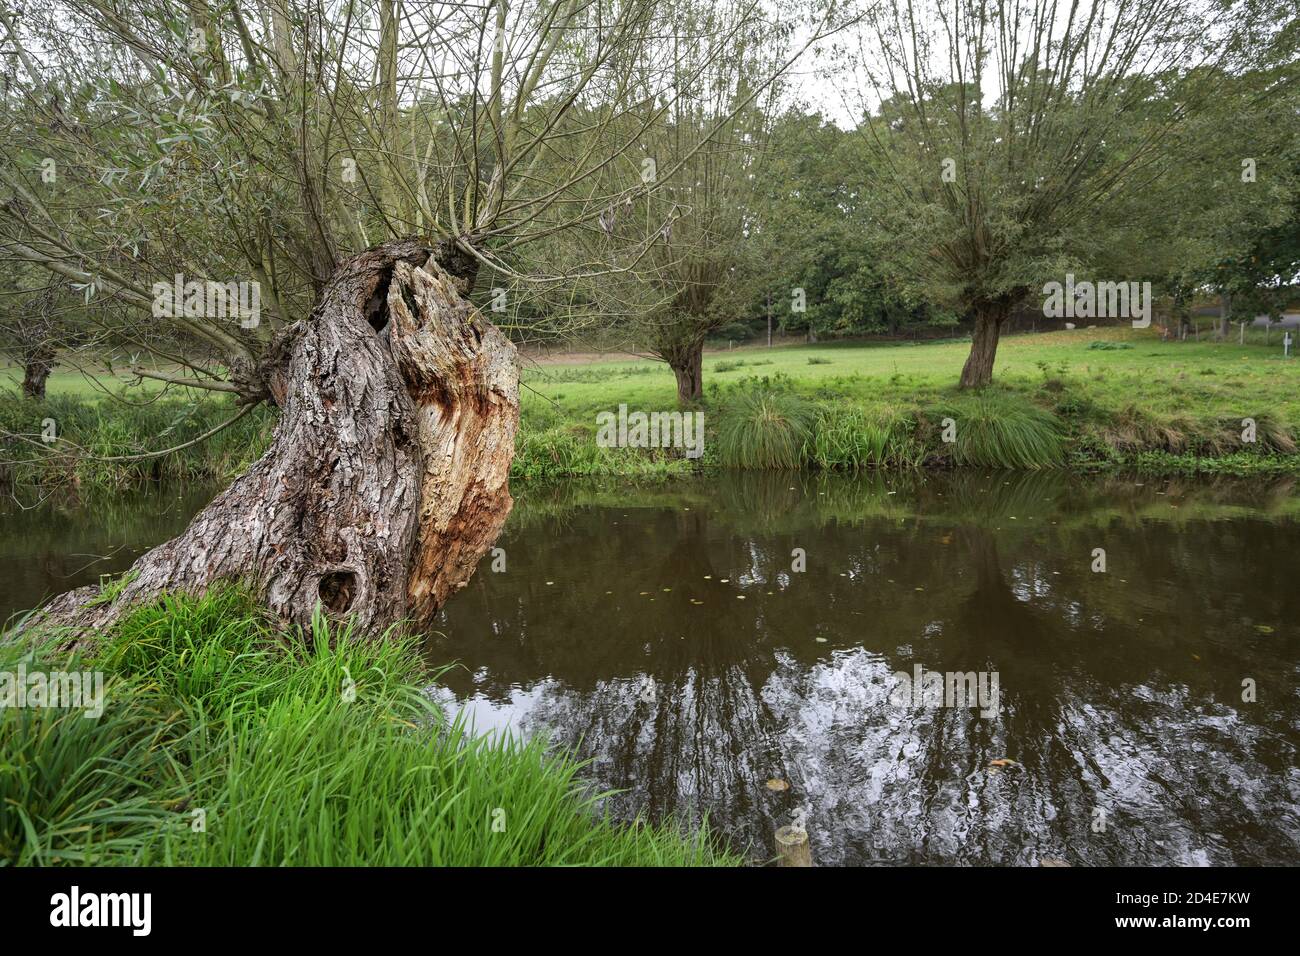 Old knotted willow trees (salix) on the banks of the river Warnow near Sternberg in Mecklenburg-Western Pomerania, Germany, copy space, selected focus Stock Photo